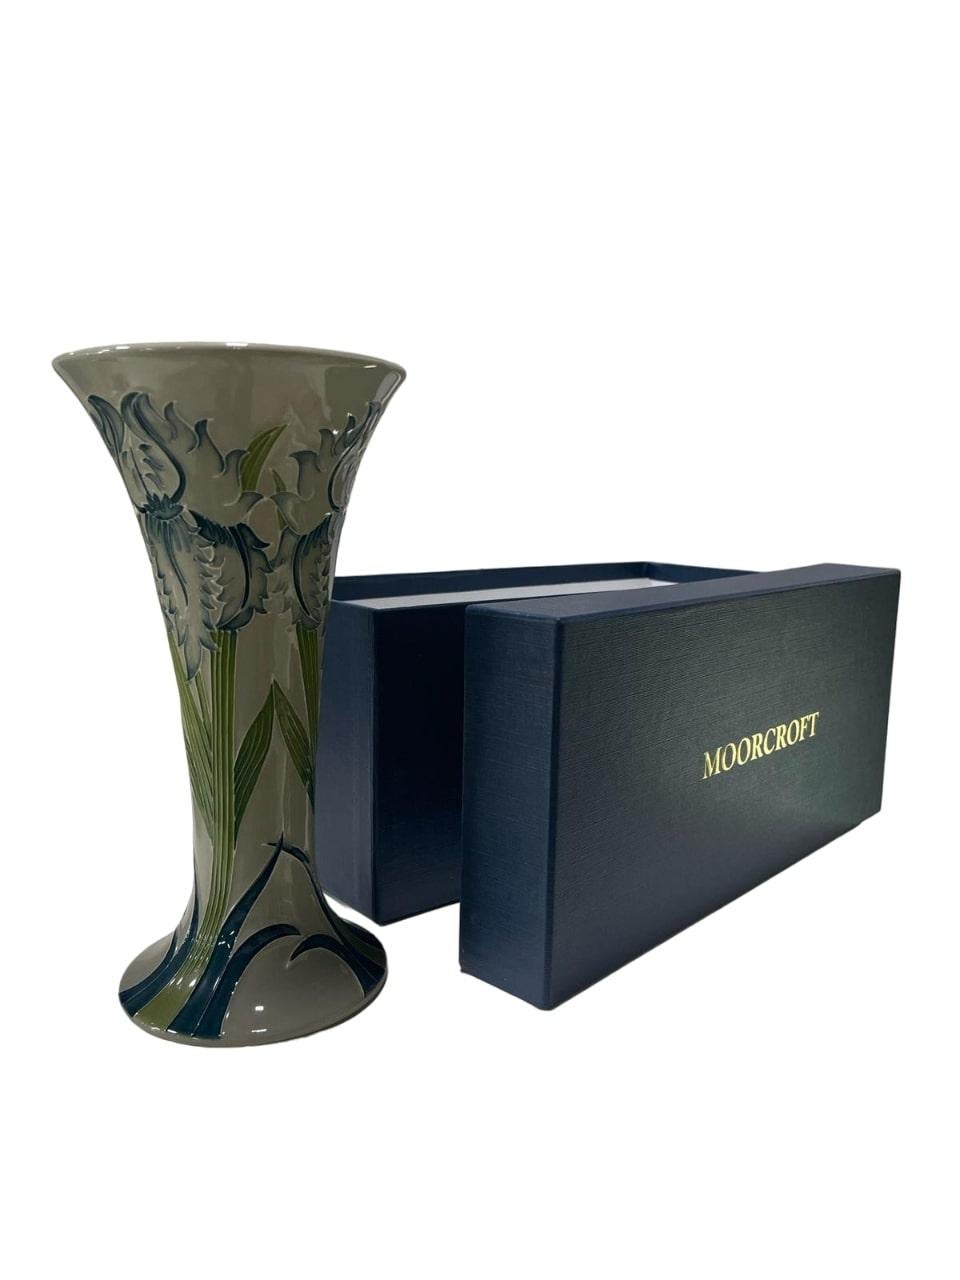 LIMITED EDITION Moorcroft Green Iris vase, from the Legacy collection dated 2013 For Sale 1